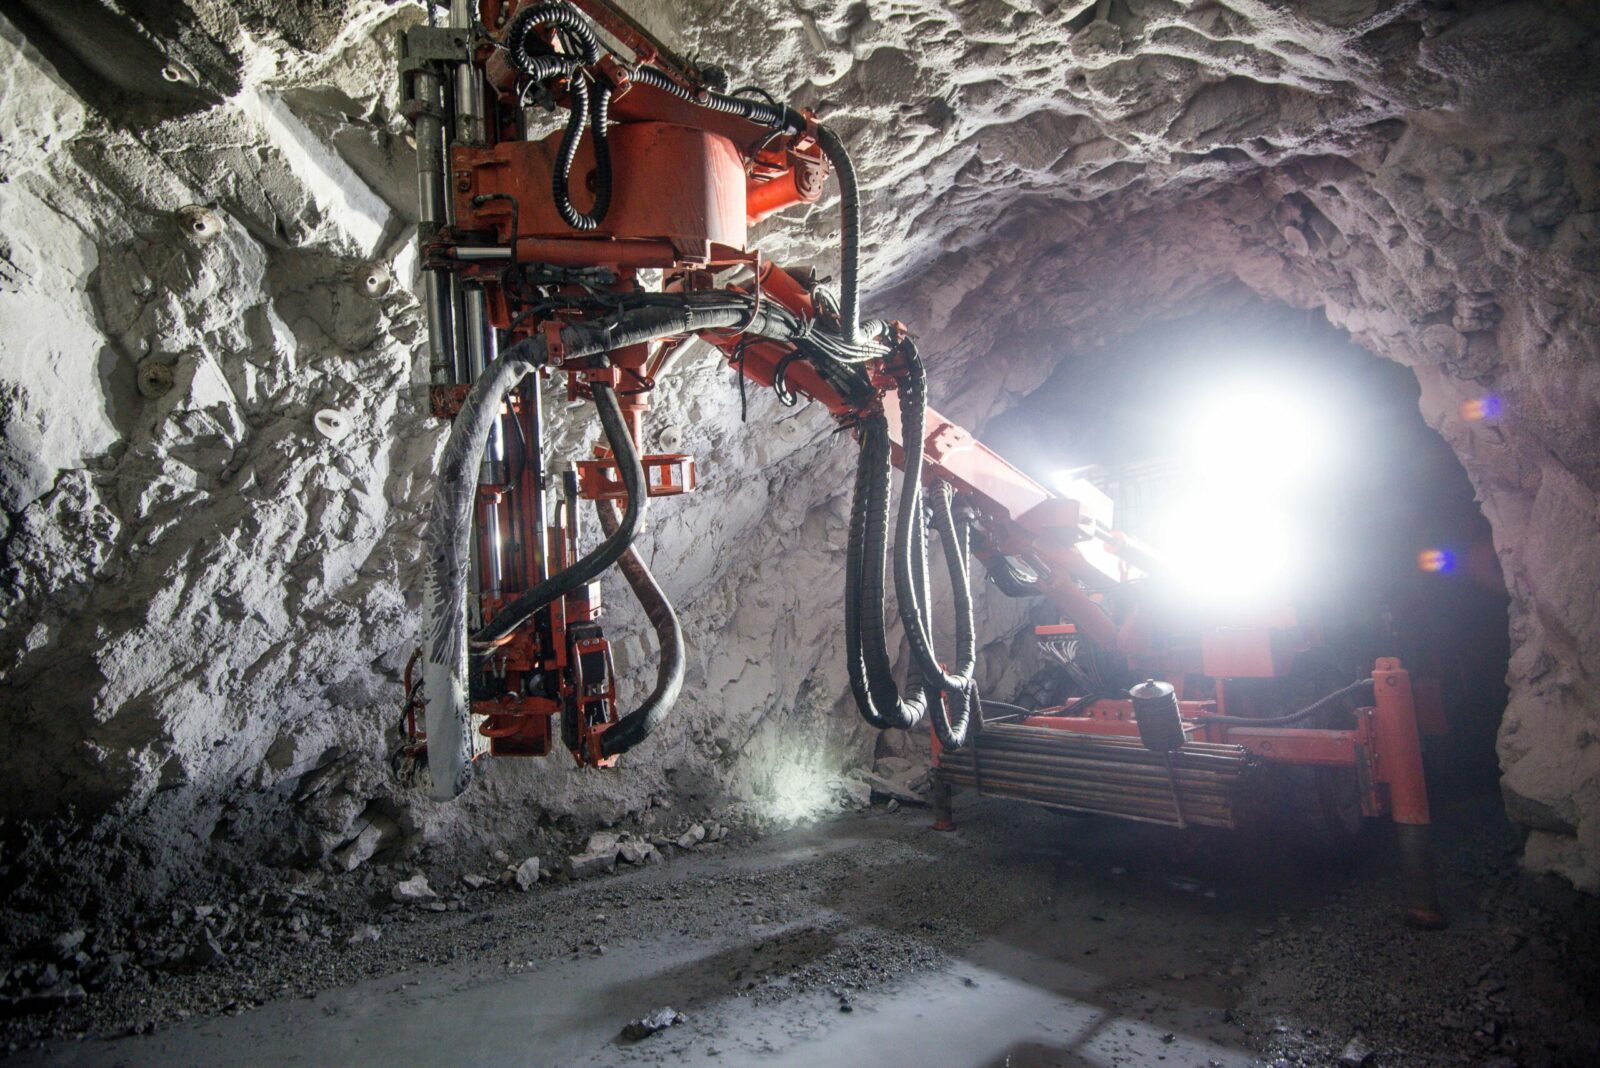 Mining | Inudstrial Diamonds for the Harshest Conditions